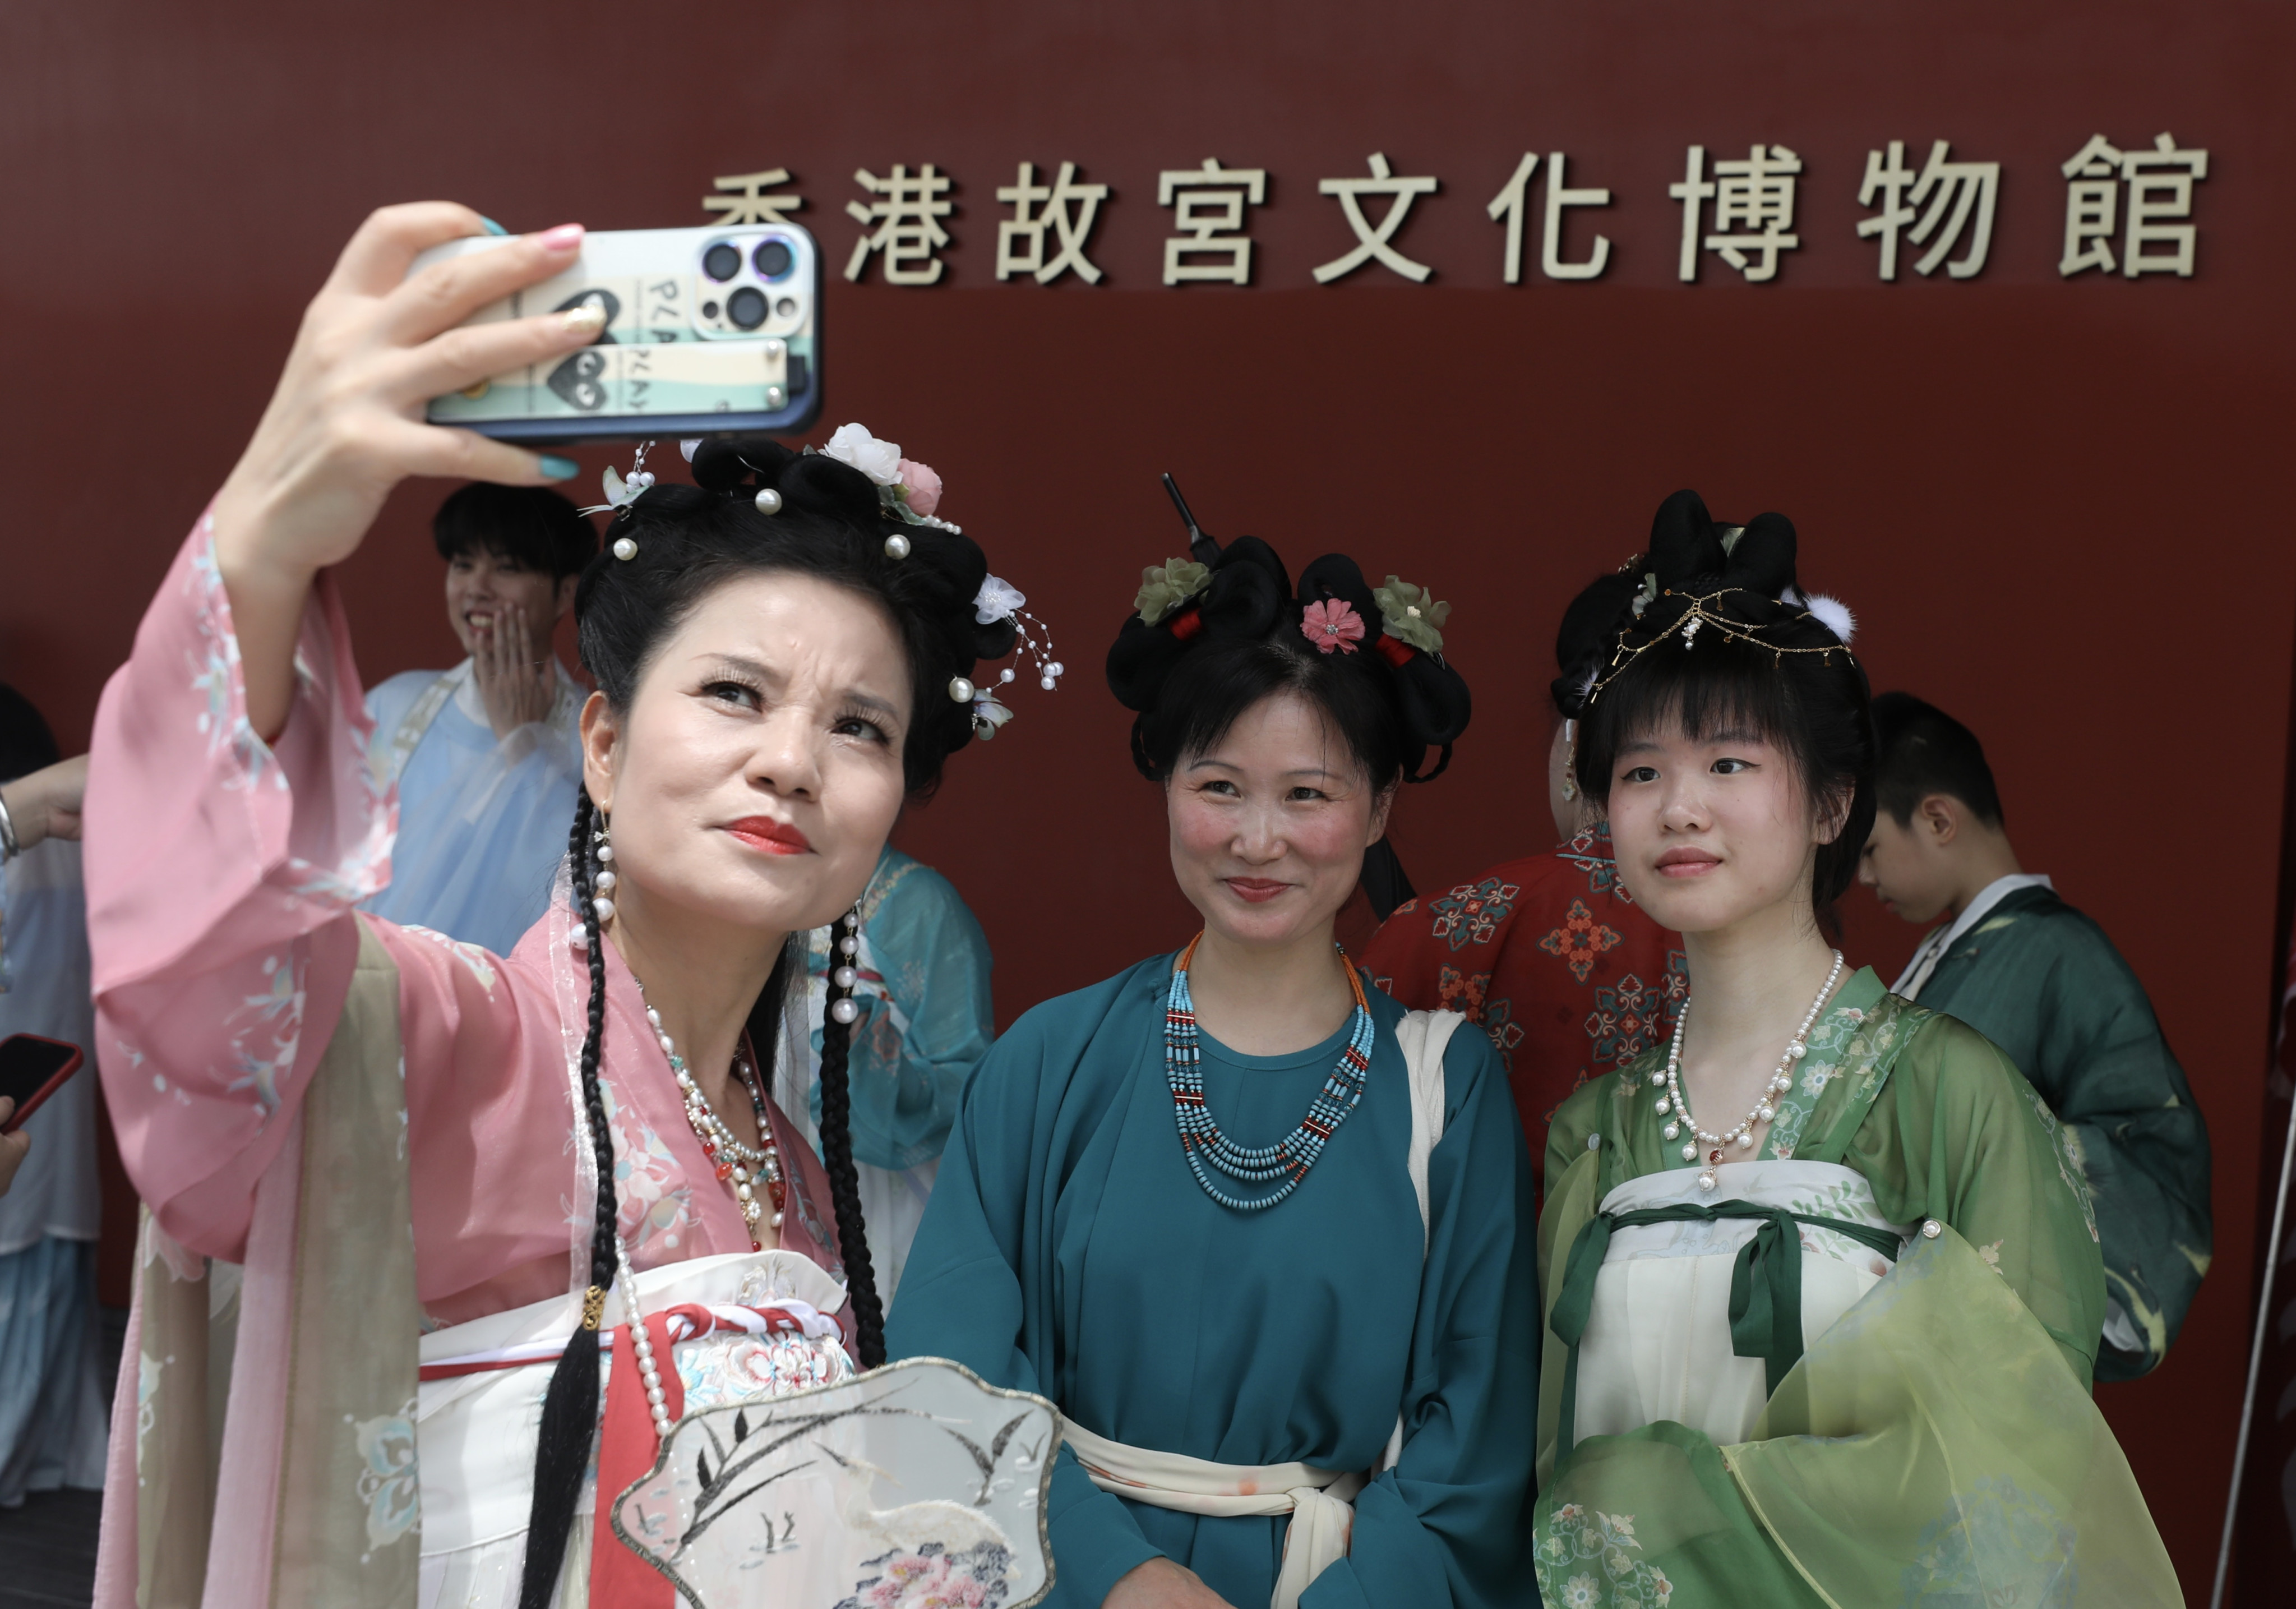 A group of Chinese nationalists clad in traditional ‘Huafu’ costume celebrate the July 1st Hong Kong Handover anniversary outside in the Palace Museum in West Kowloon. Rising nationalism in China has spurred increasing interest in Han clothing styles amid rising intolerance for some other types of dress. Photo: SCMP / Xiaomei Chen